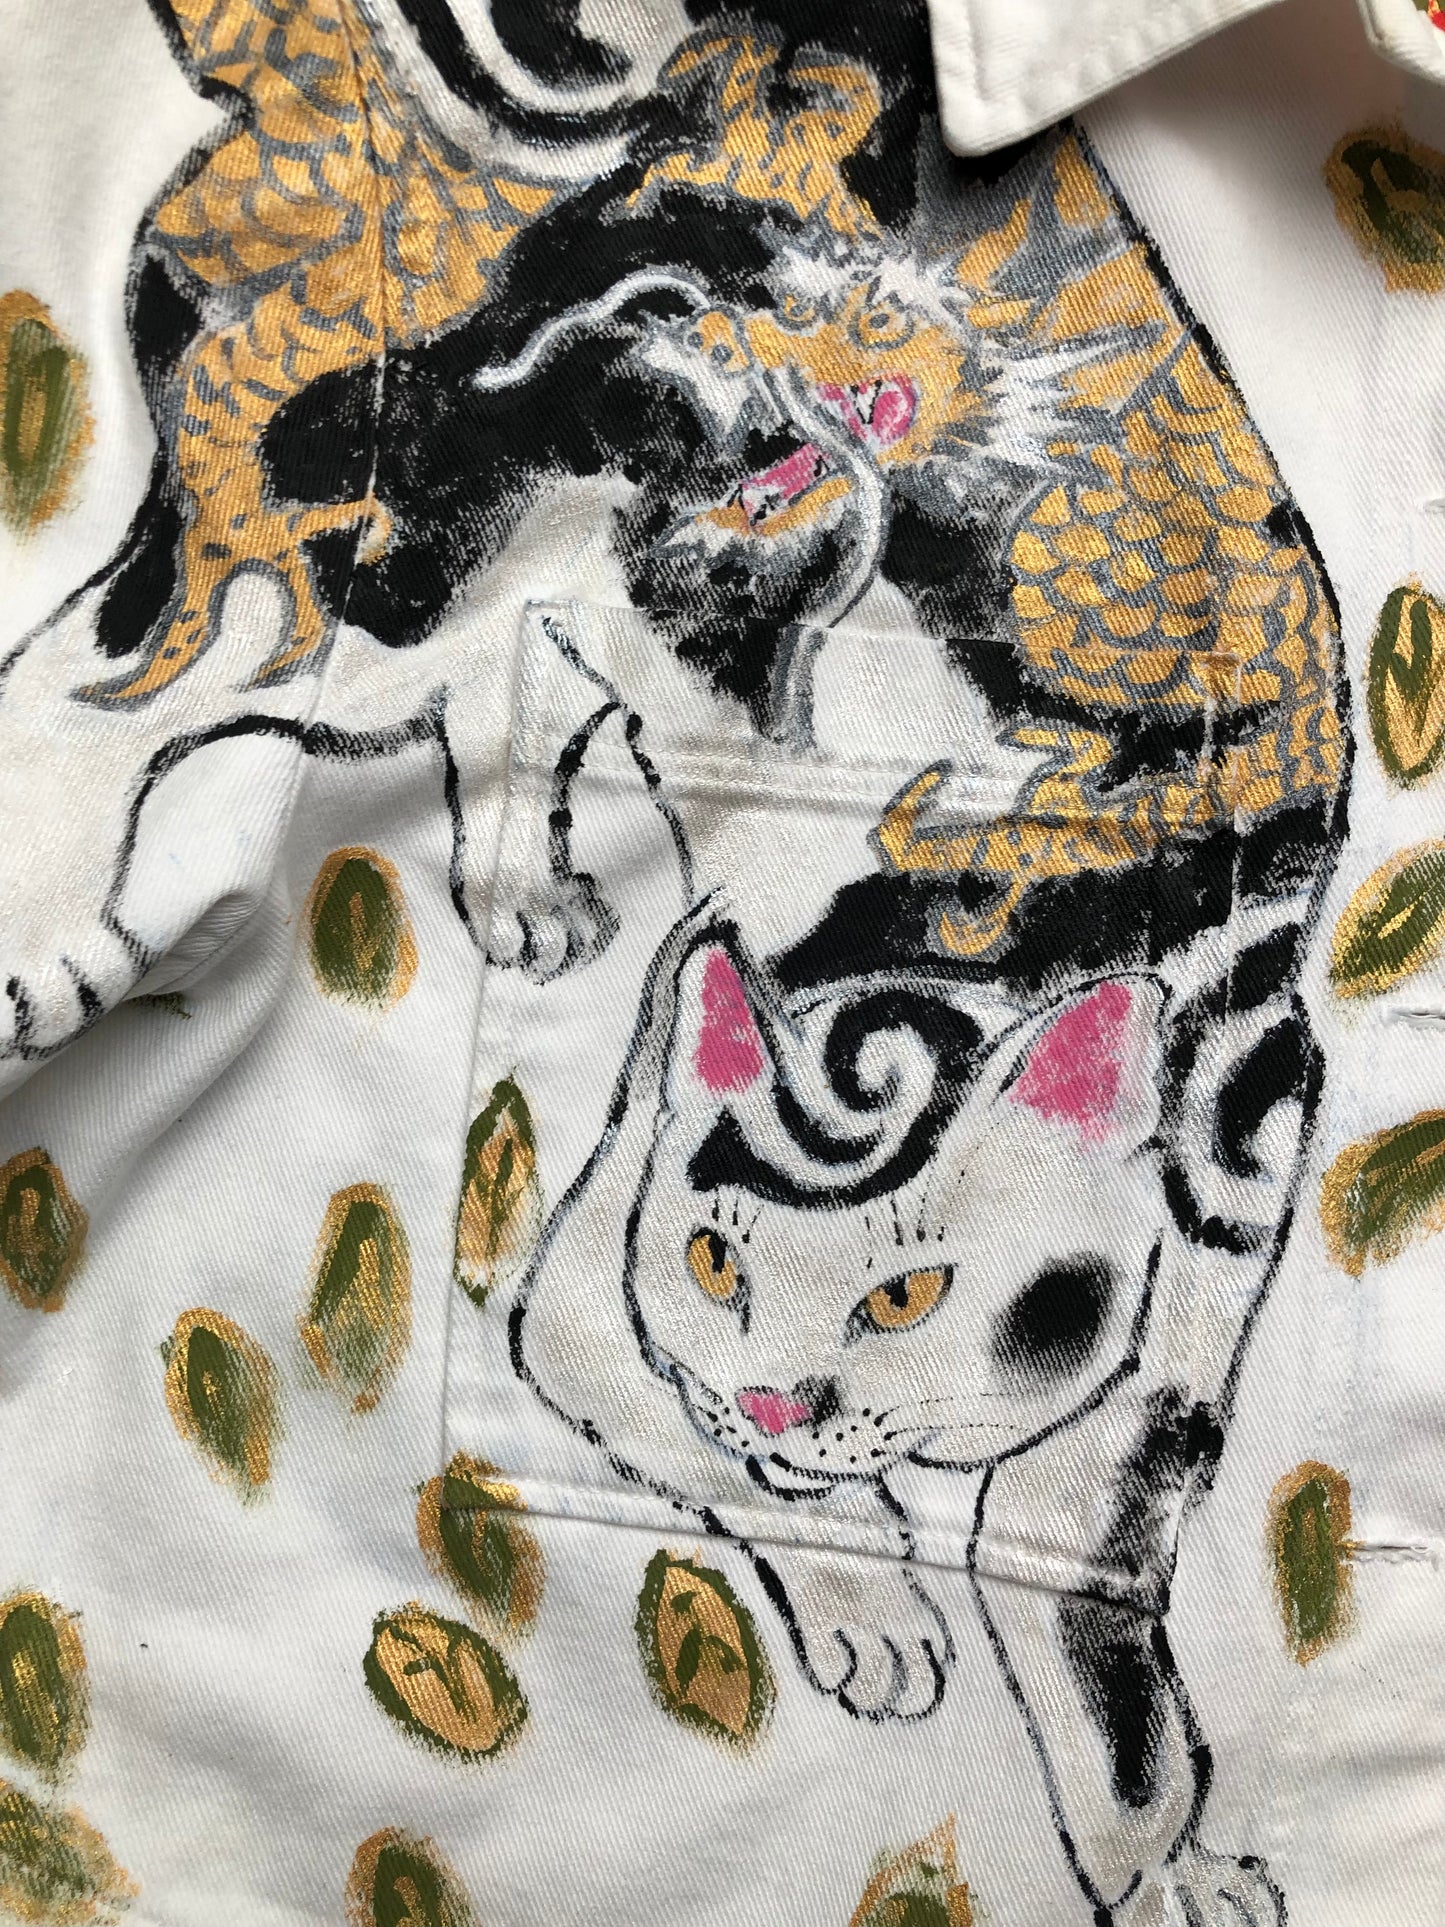 Cute cat with a mustache and an evil dragon tattoo on a women's denim jacket